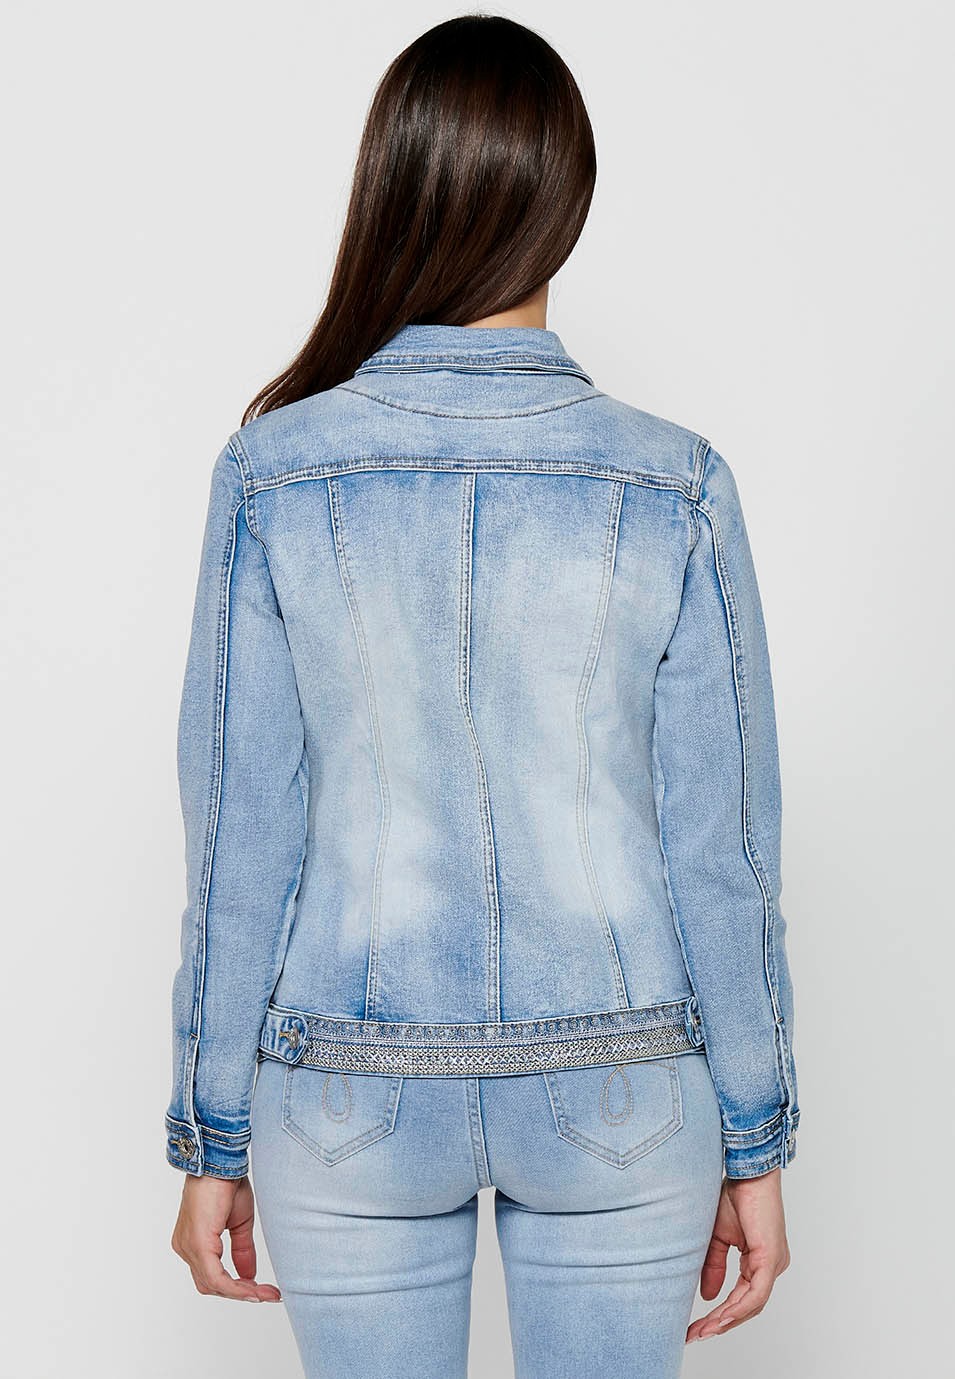 Denim jacket with front closure with buttons and shirt collar with pockets and embroidered details in light blue for women 10